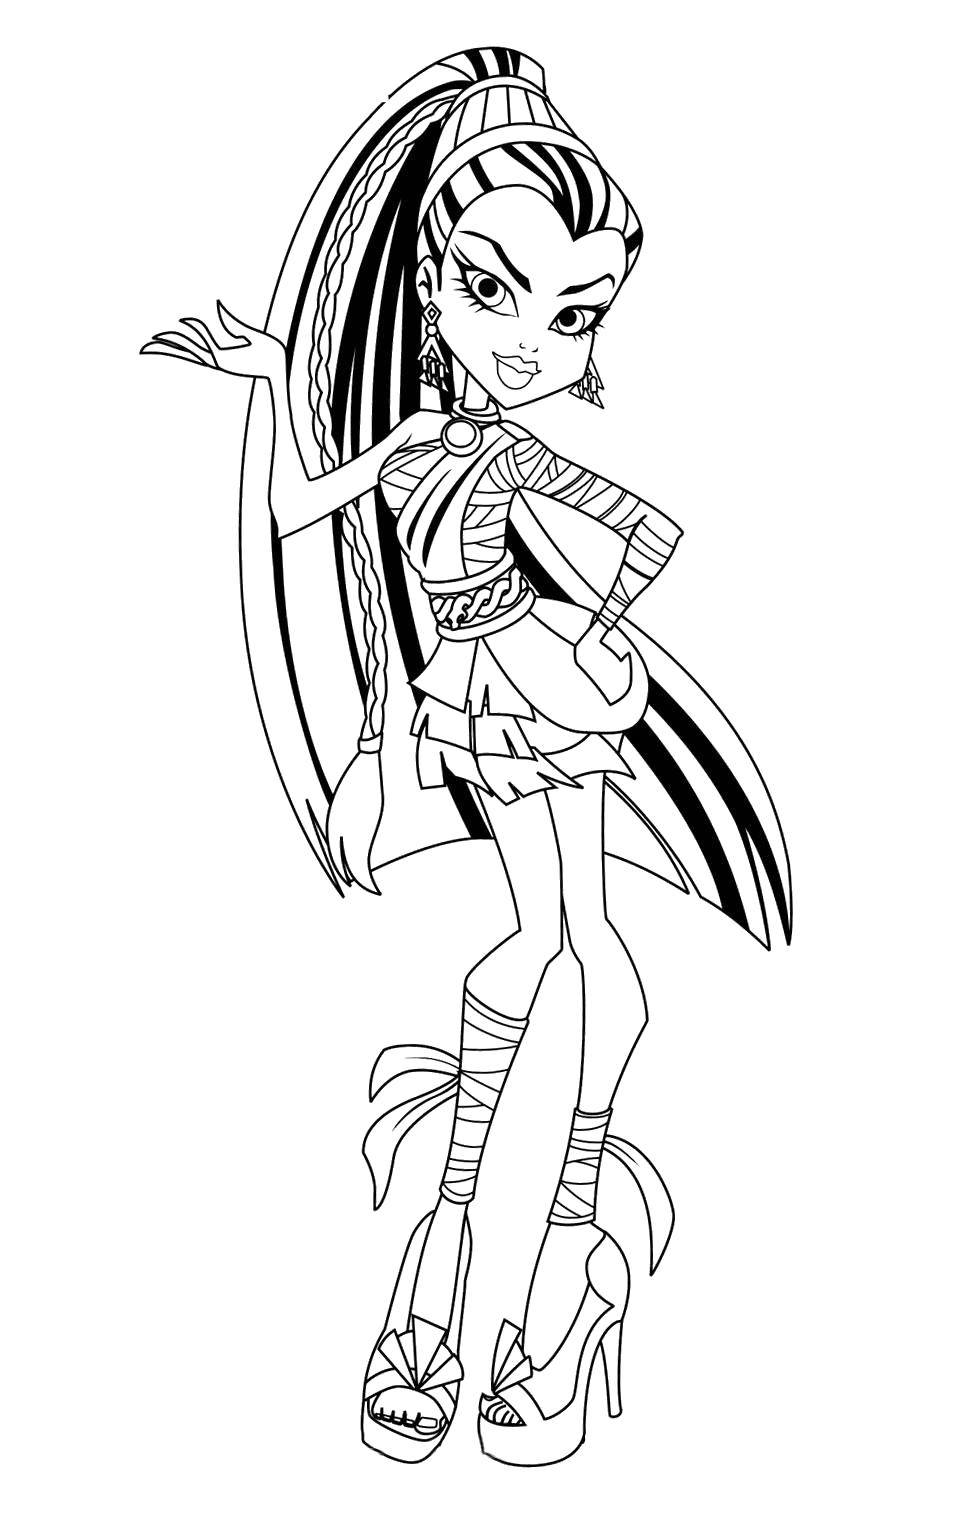 Coloring Monster with fabulous hair. Category monster high. Tags:  Monster High.